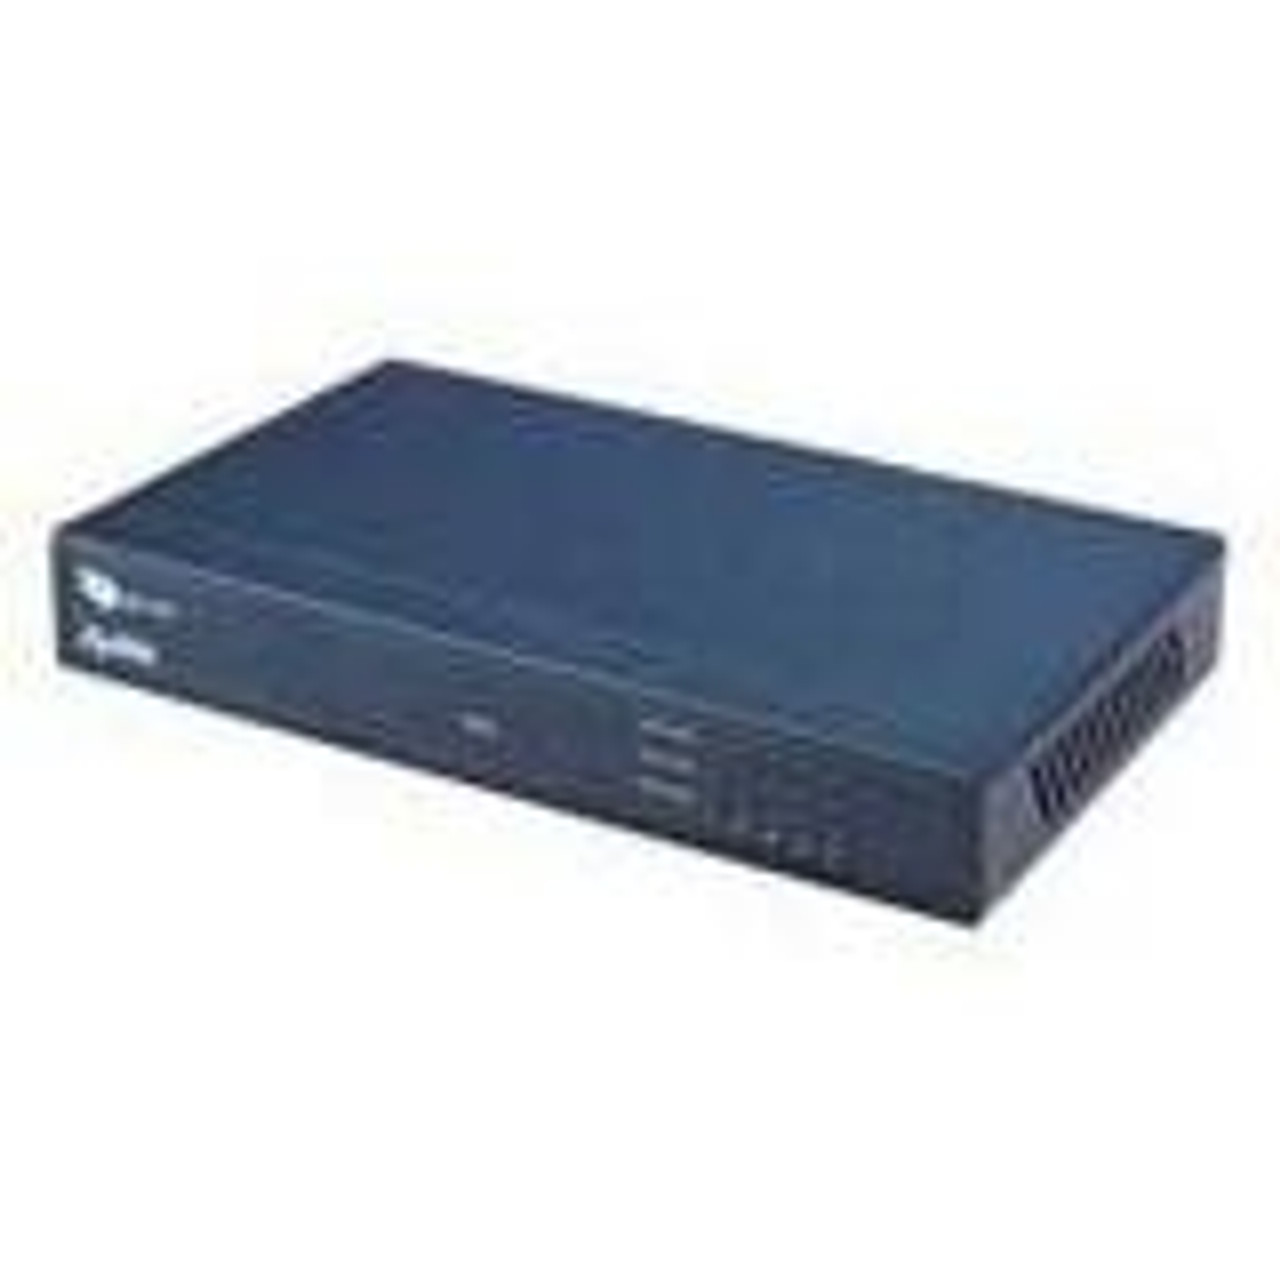 GS-105 Zyxel Dimension 5-Ports 100/1000M Workgroup Switch (Refurbished)